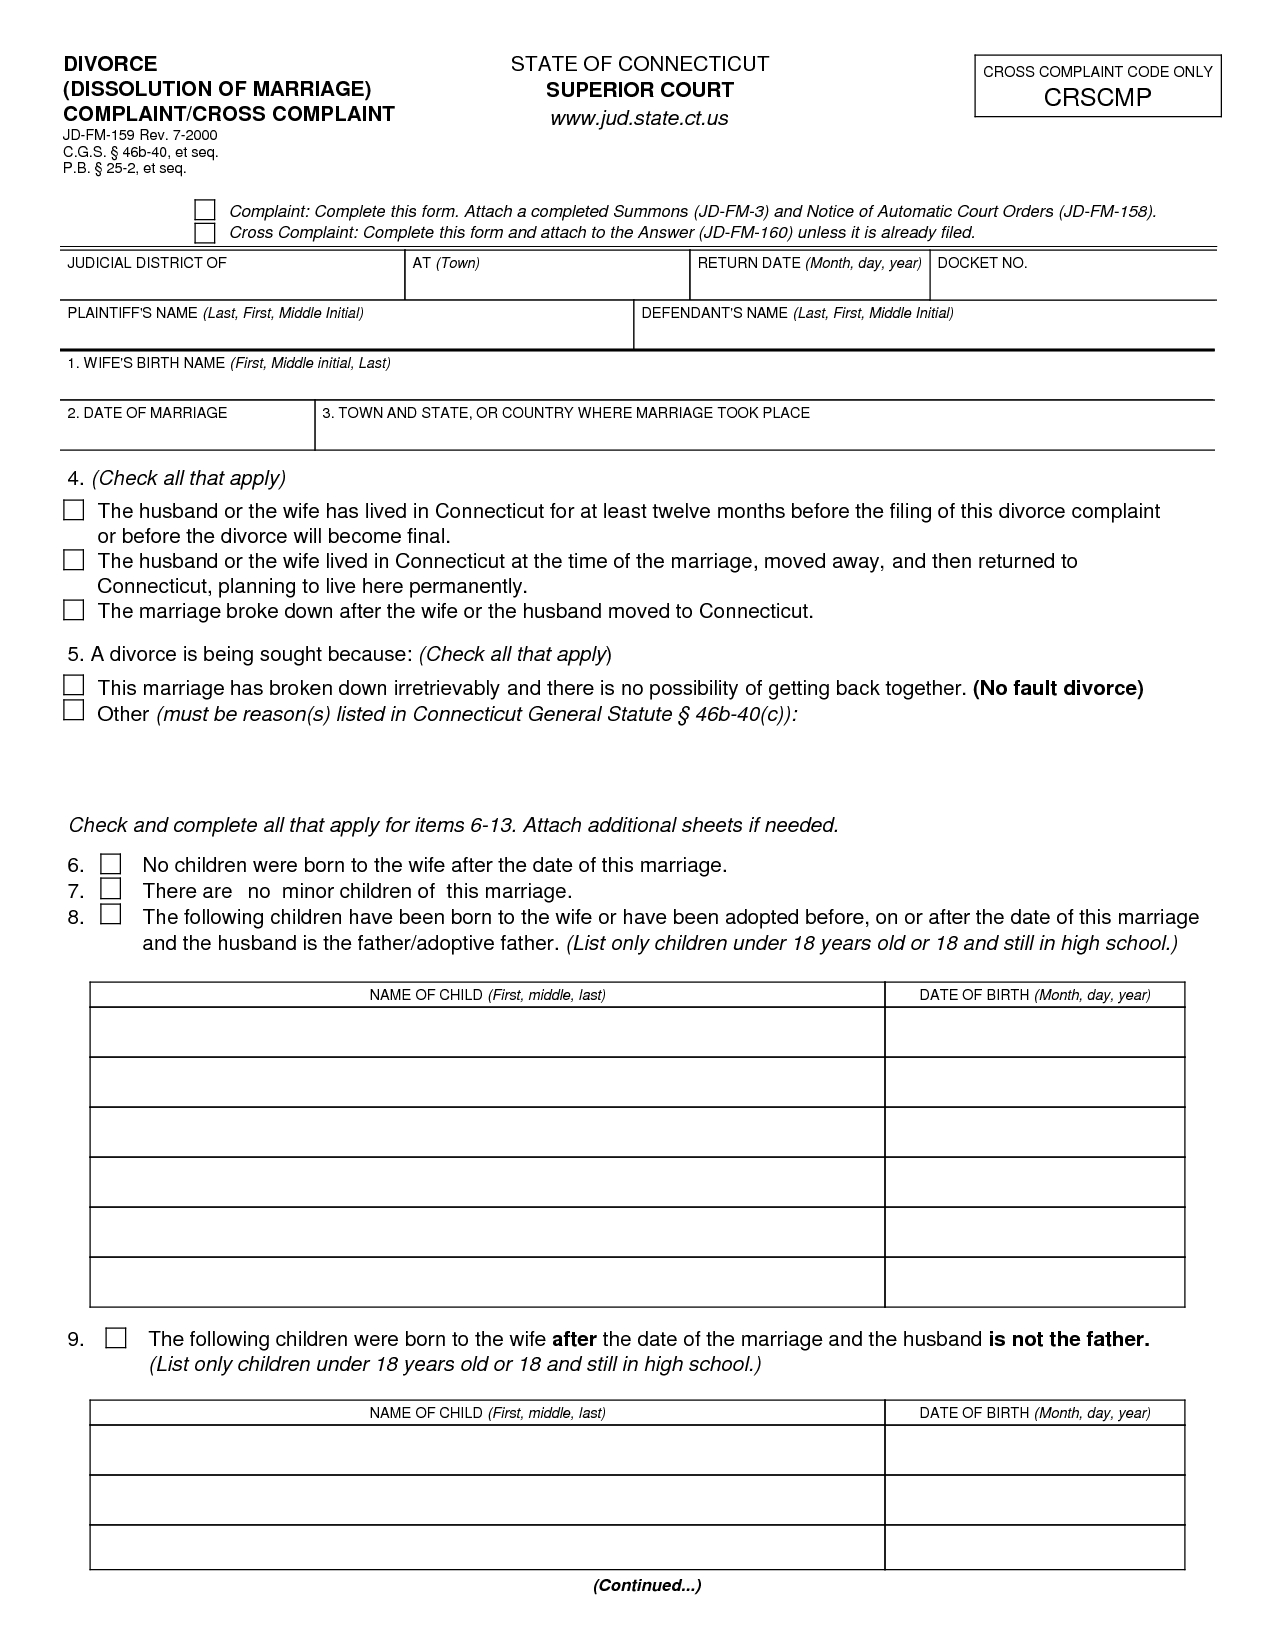 Minnesota Divorce Papers Free Form : Resume Examples #4Vlvgr2Pox - Free Printable Divorce Papers For North Carolina